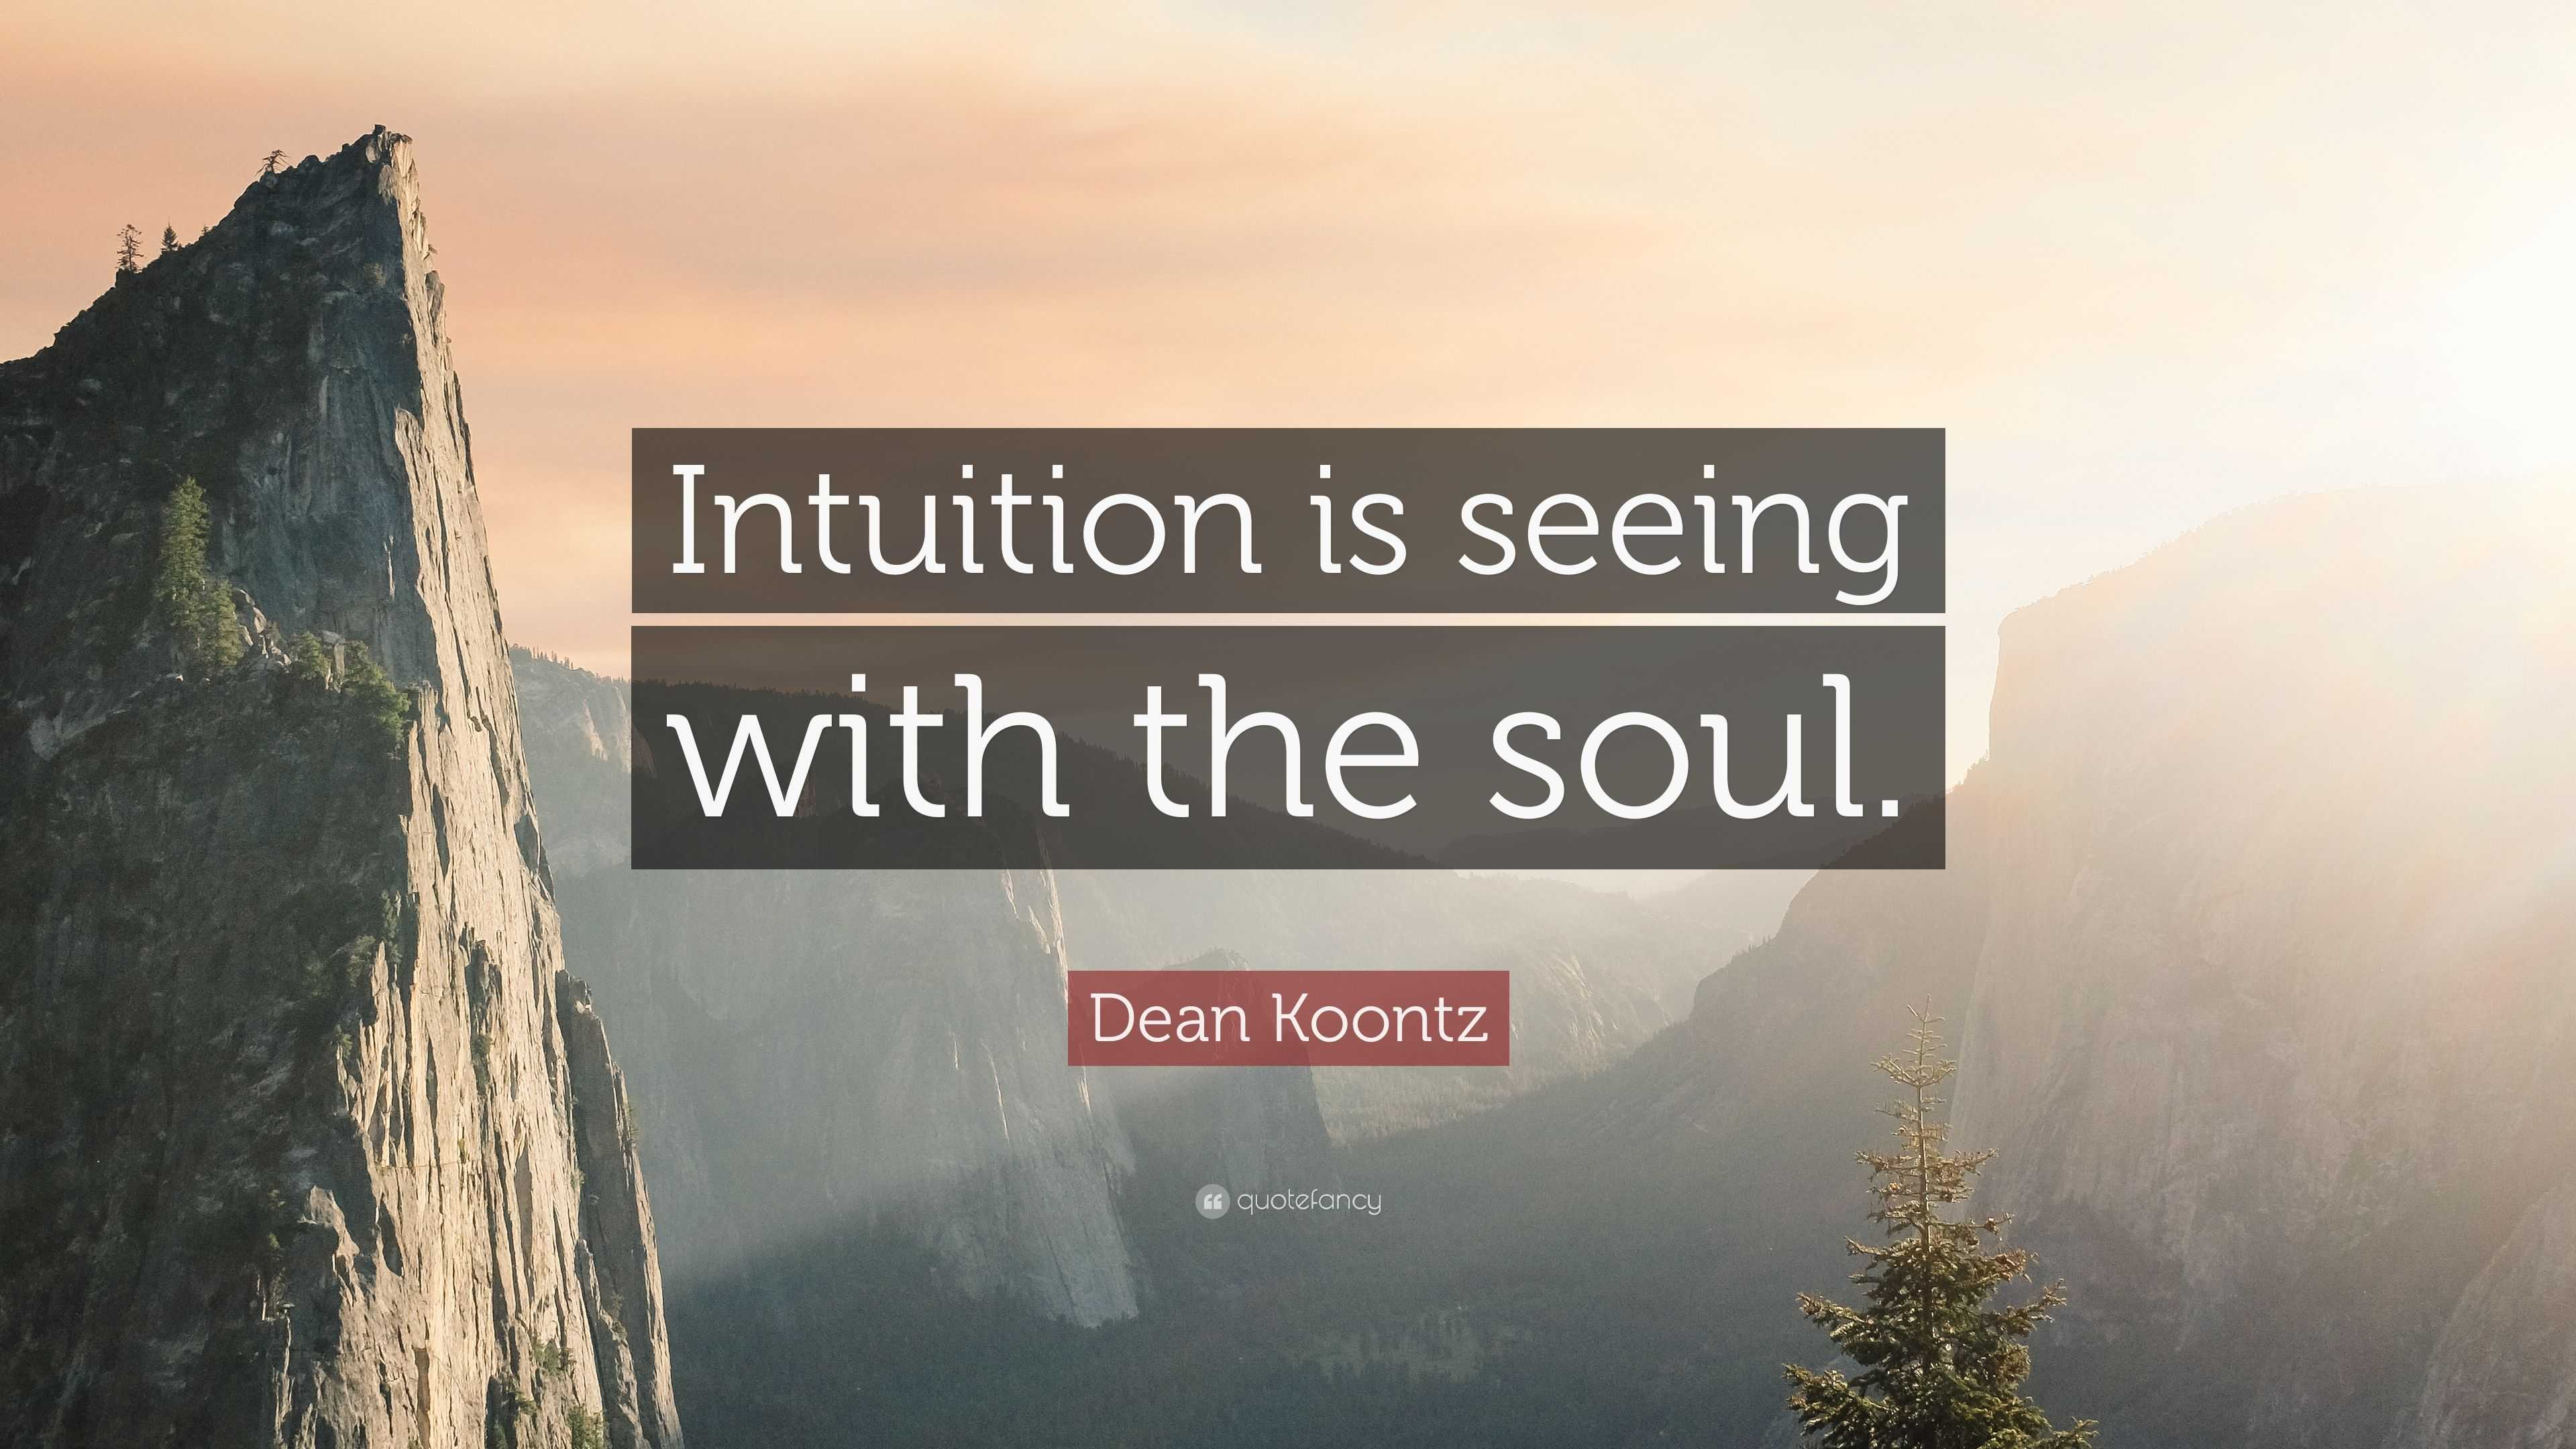 Dean Koontz Quote “Intuition is seeing with the soul.” (8